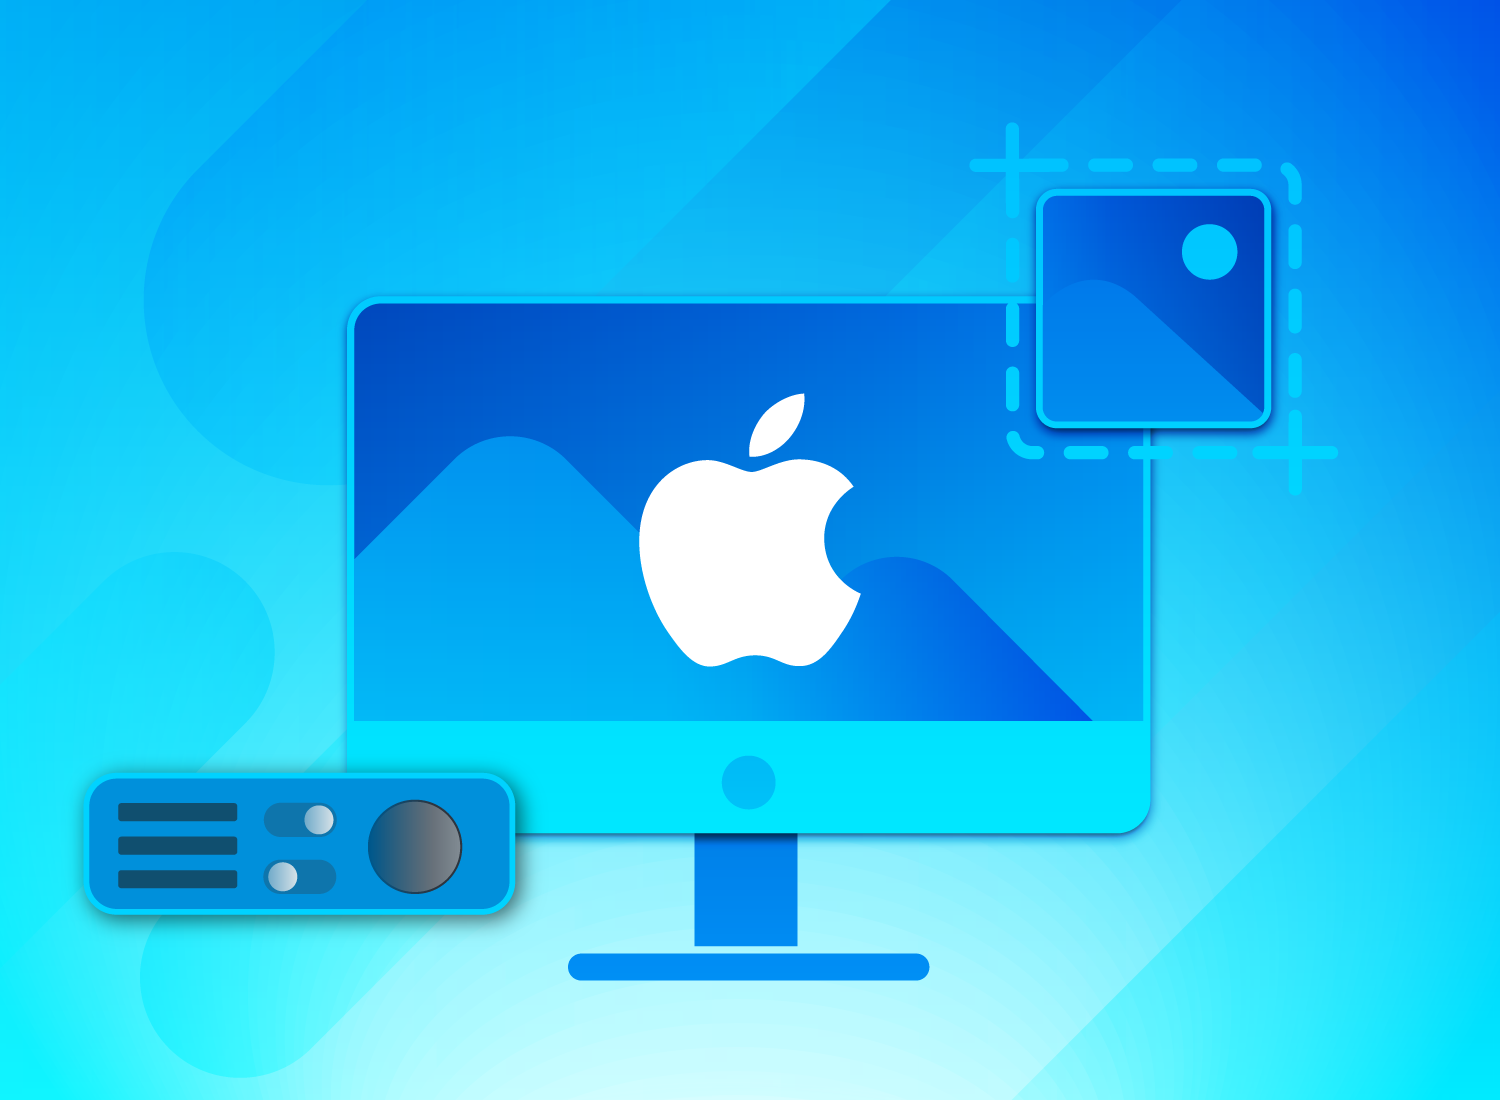 Vector illustration of a Mac computer screen with the Apple logo displayed, accompanied by a webcam icon outlined on the right, indicating a tutorial for screen recording on a Mac. A widget with control buttons lies to the left of the screen, suggesting user interface elements for recording software. The entire image set against a gradient blue background with abstract design elements, ideal for content related to tech tutorials, digital recording, and Mac operating system instructions.